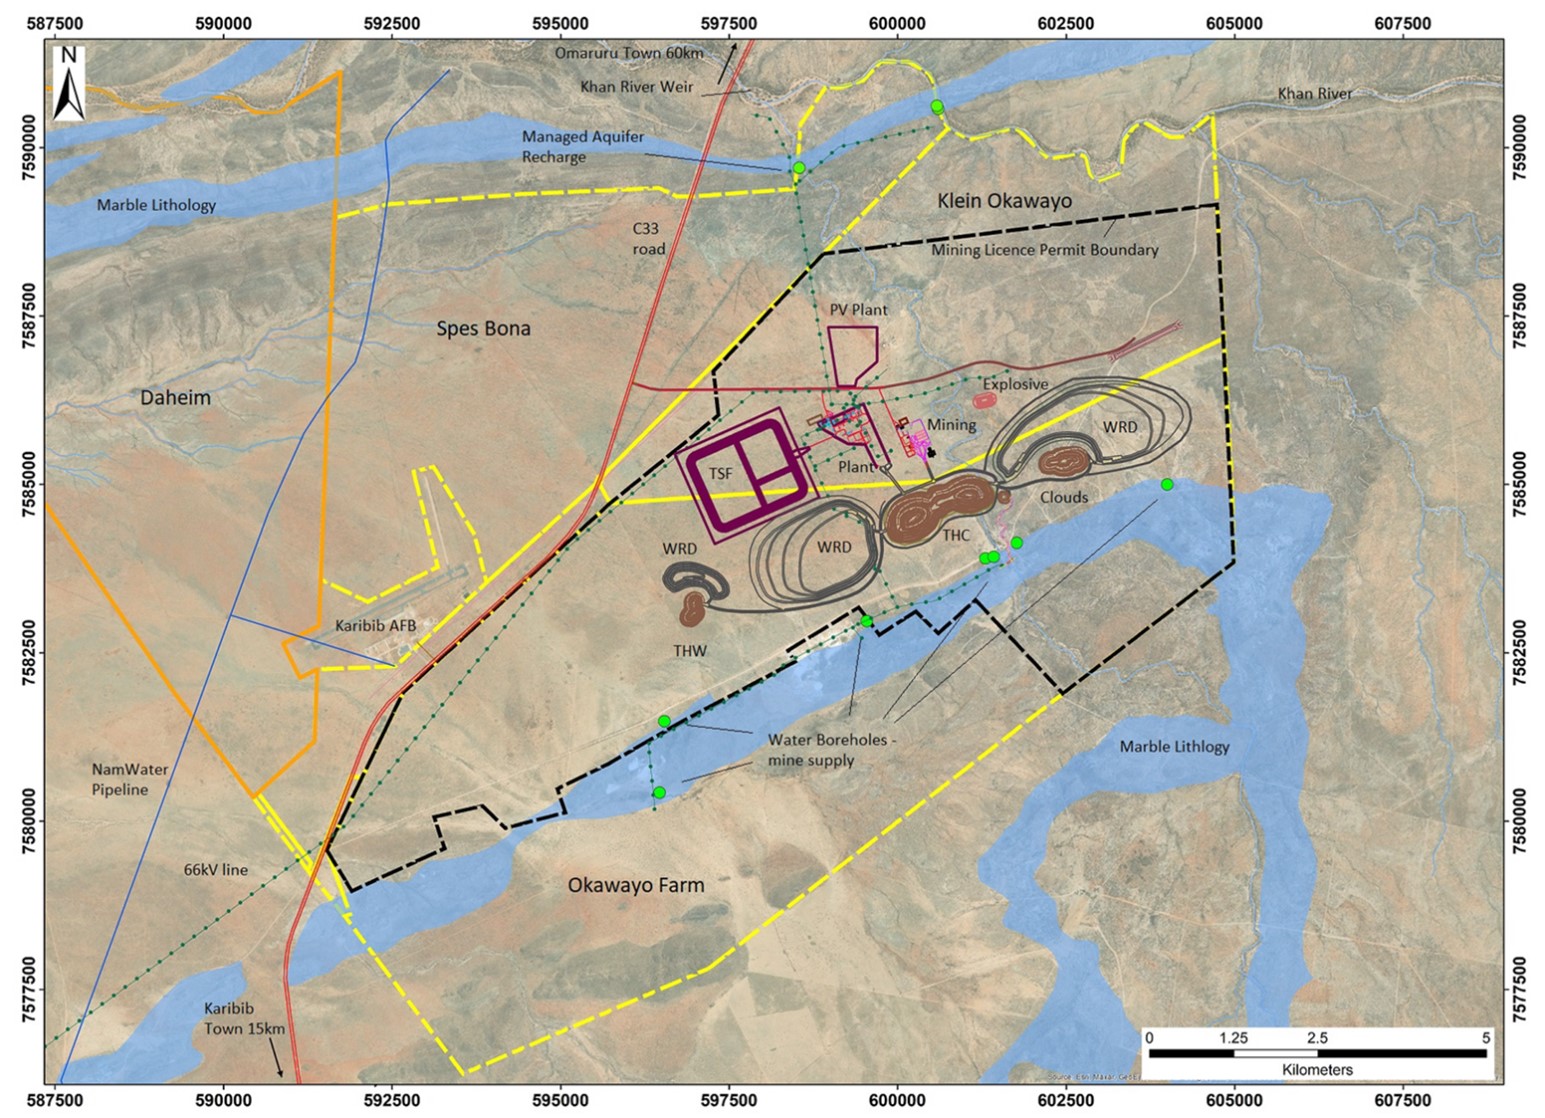 Figure 1: Location of Farms and Surface Infrastructure pertaining to Osino’ Twin Hills Gold Project